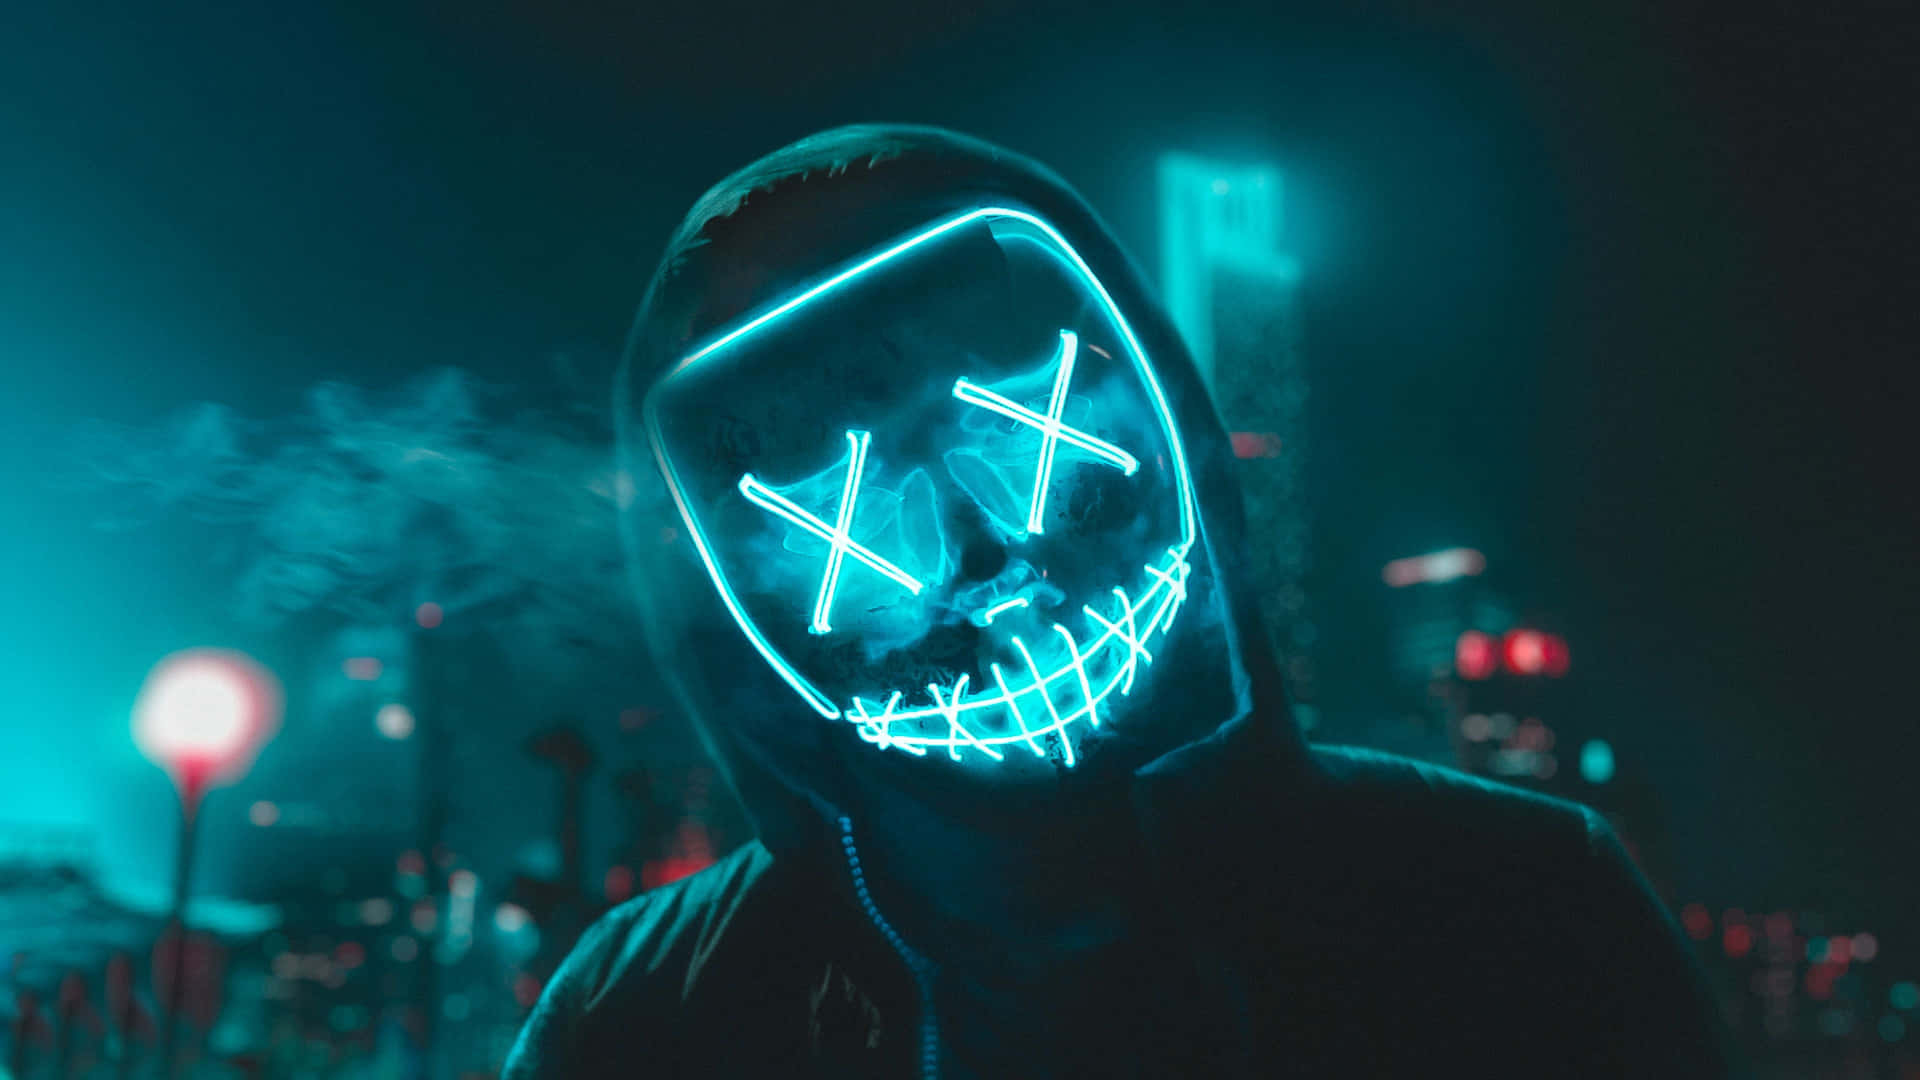 Blue Neon Smiling Mask In 4k Quality Background